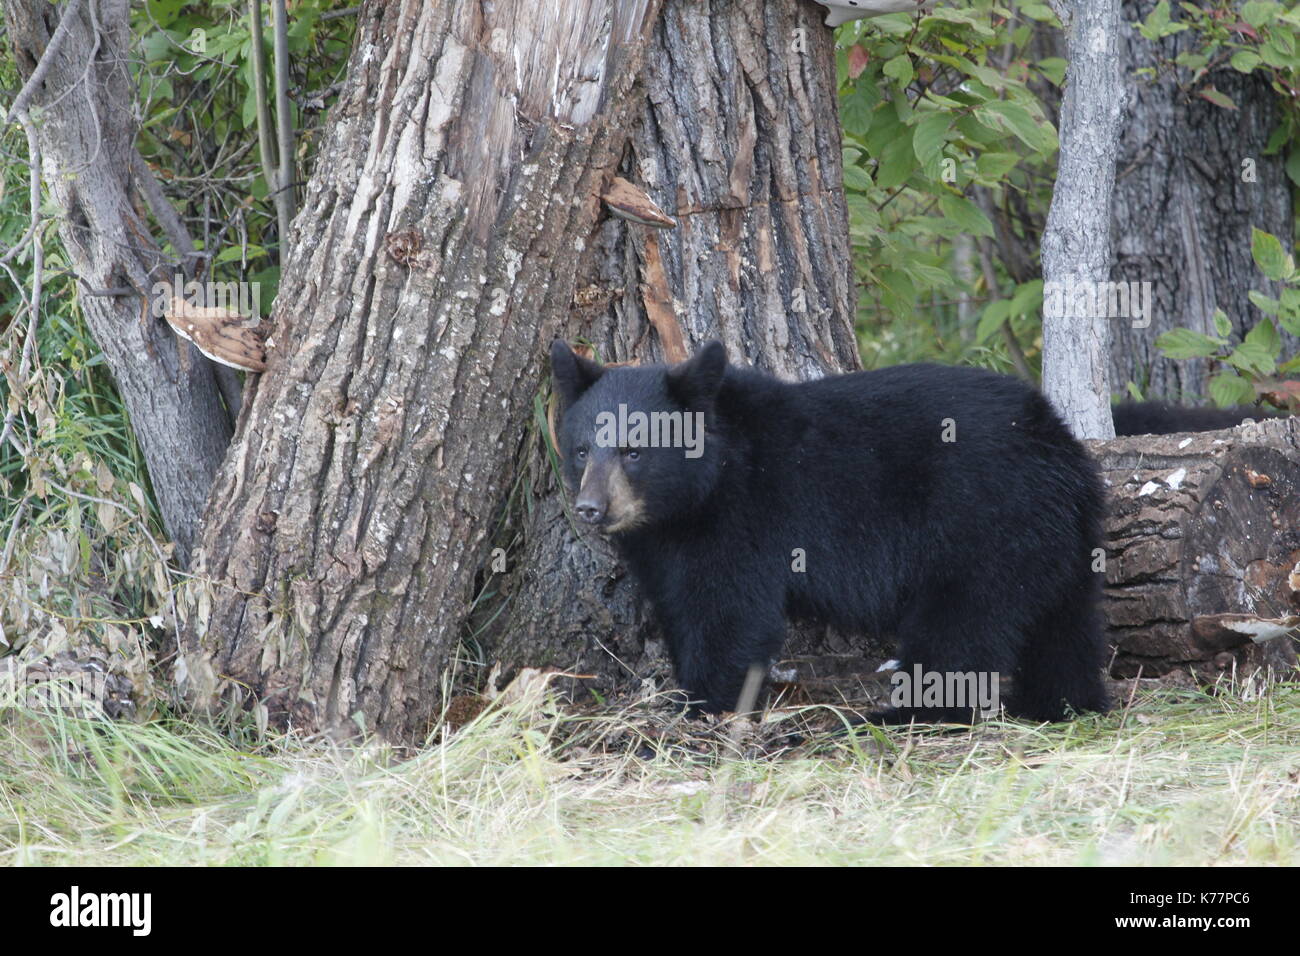 Black bear cub standing by old rotten tree Stock Photo